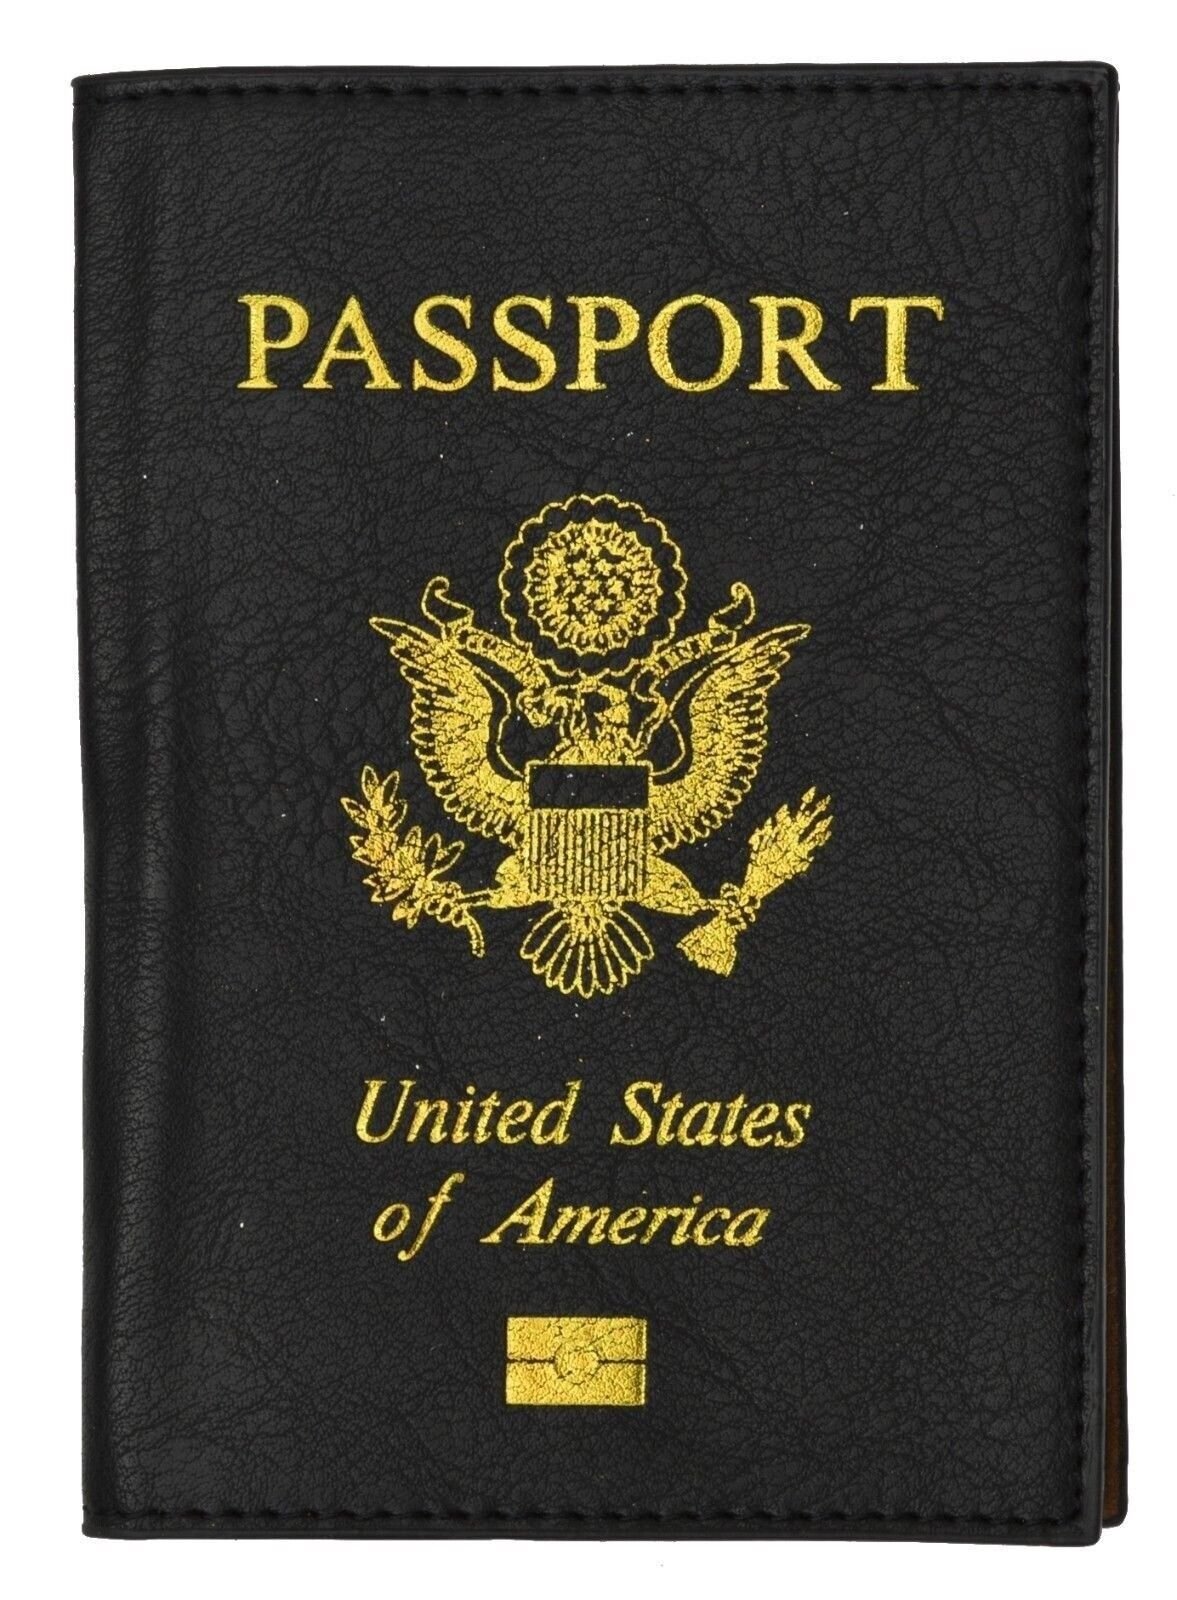 Travel Leather USA Passport Organizer Holder Card Protector Cover Wallet Black!!